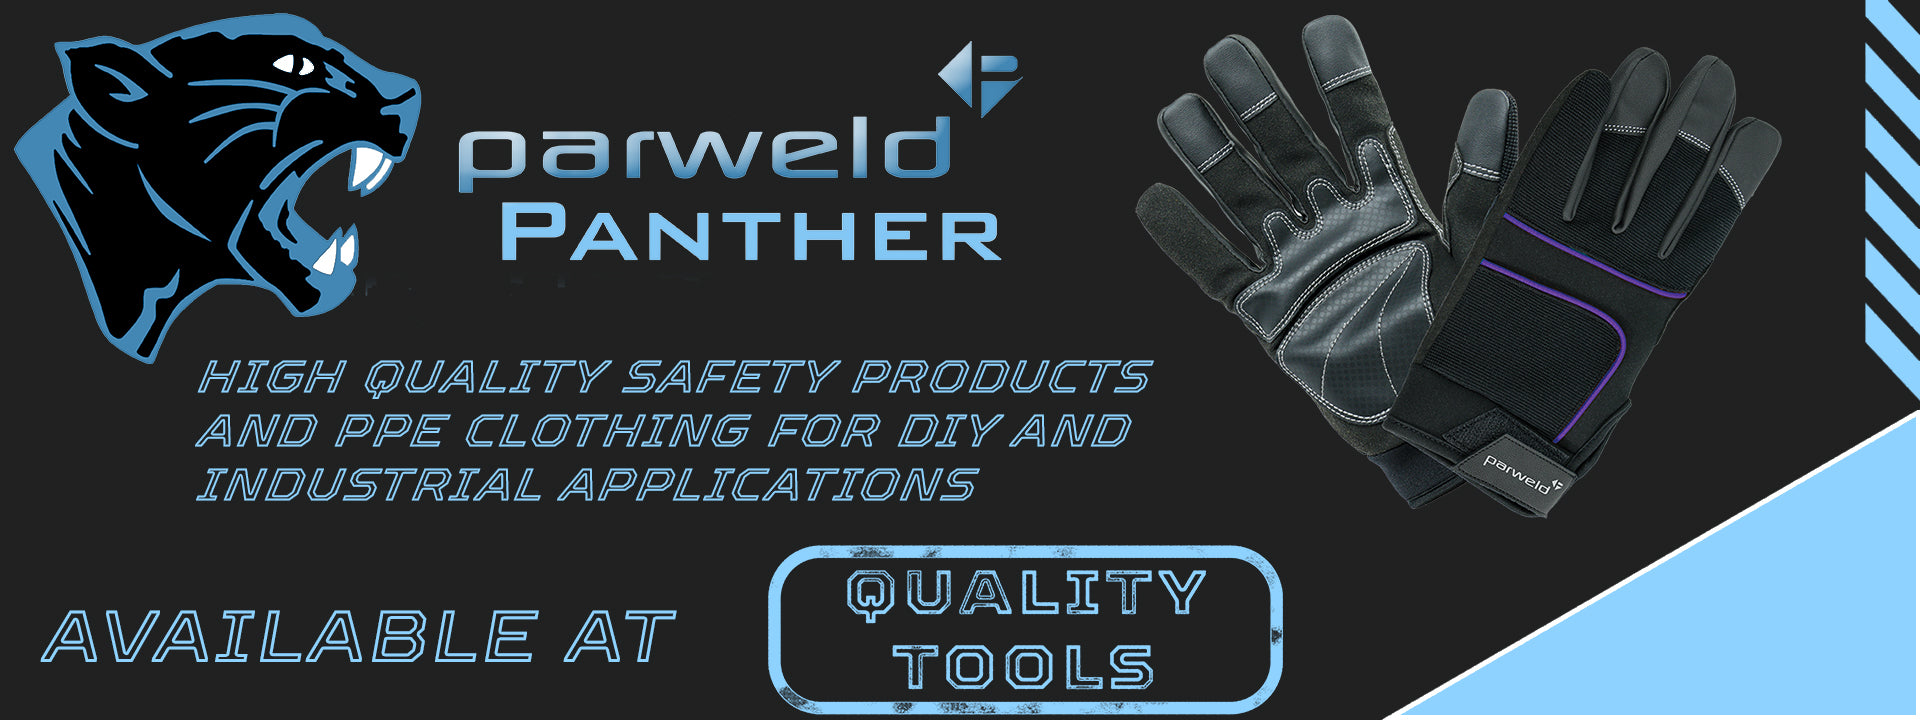 Parweld PPE available at Quality Tools UK